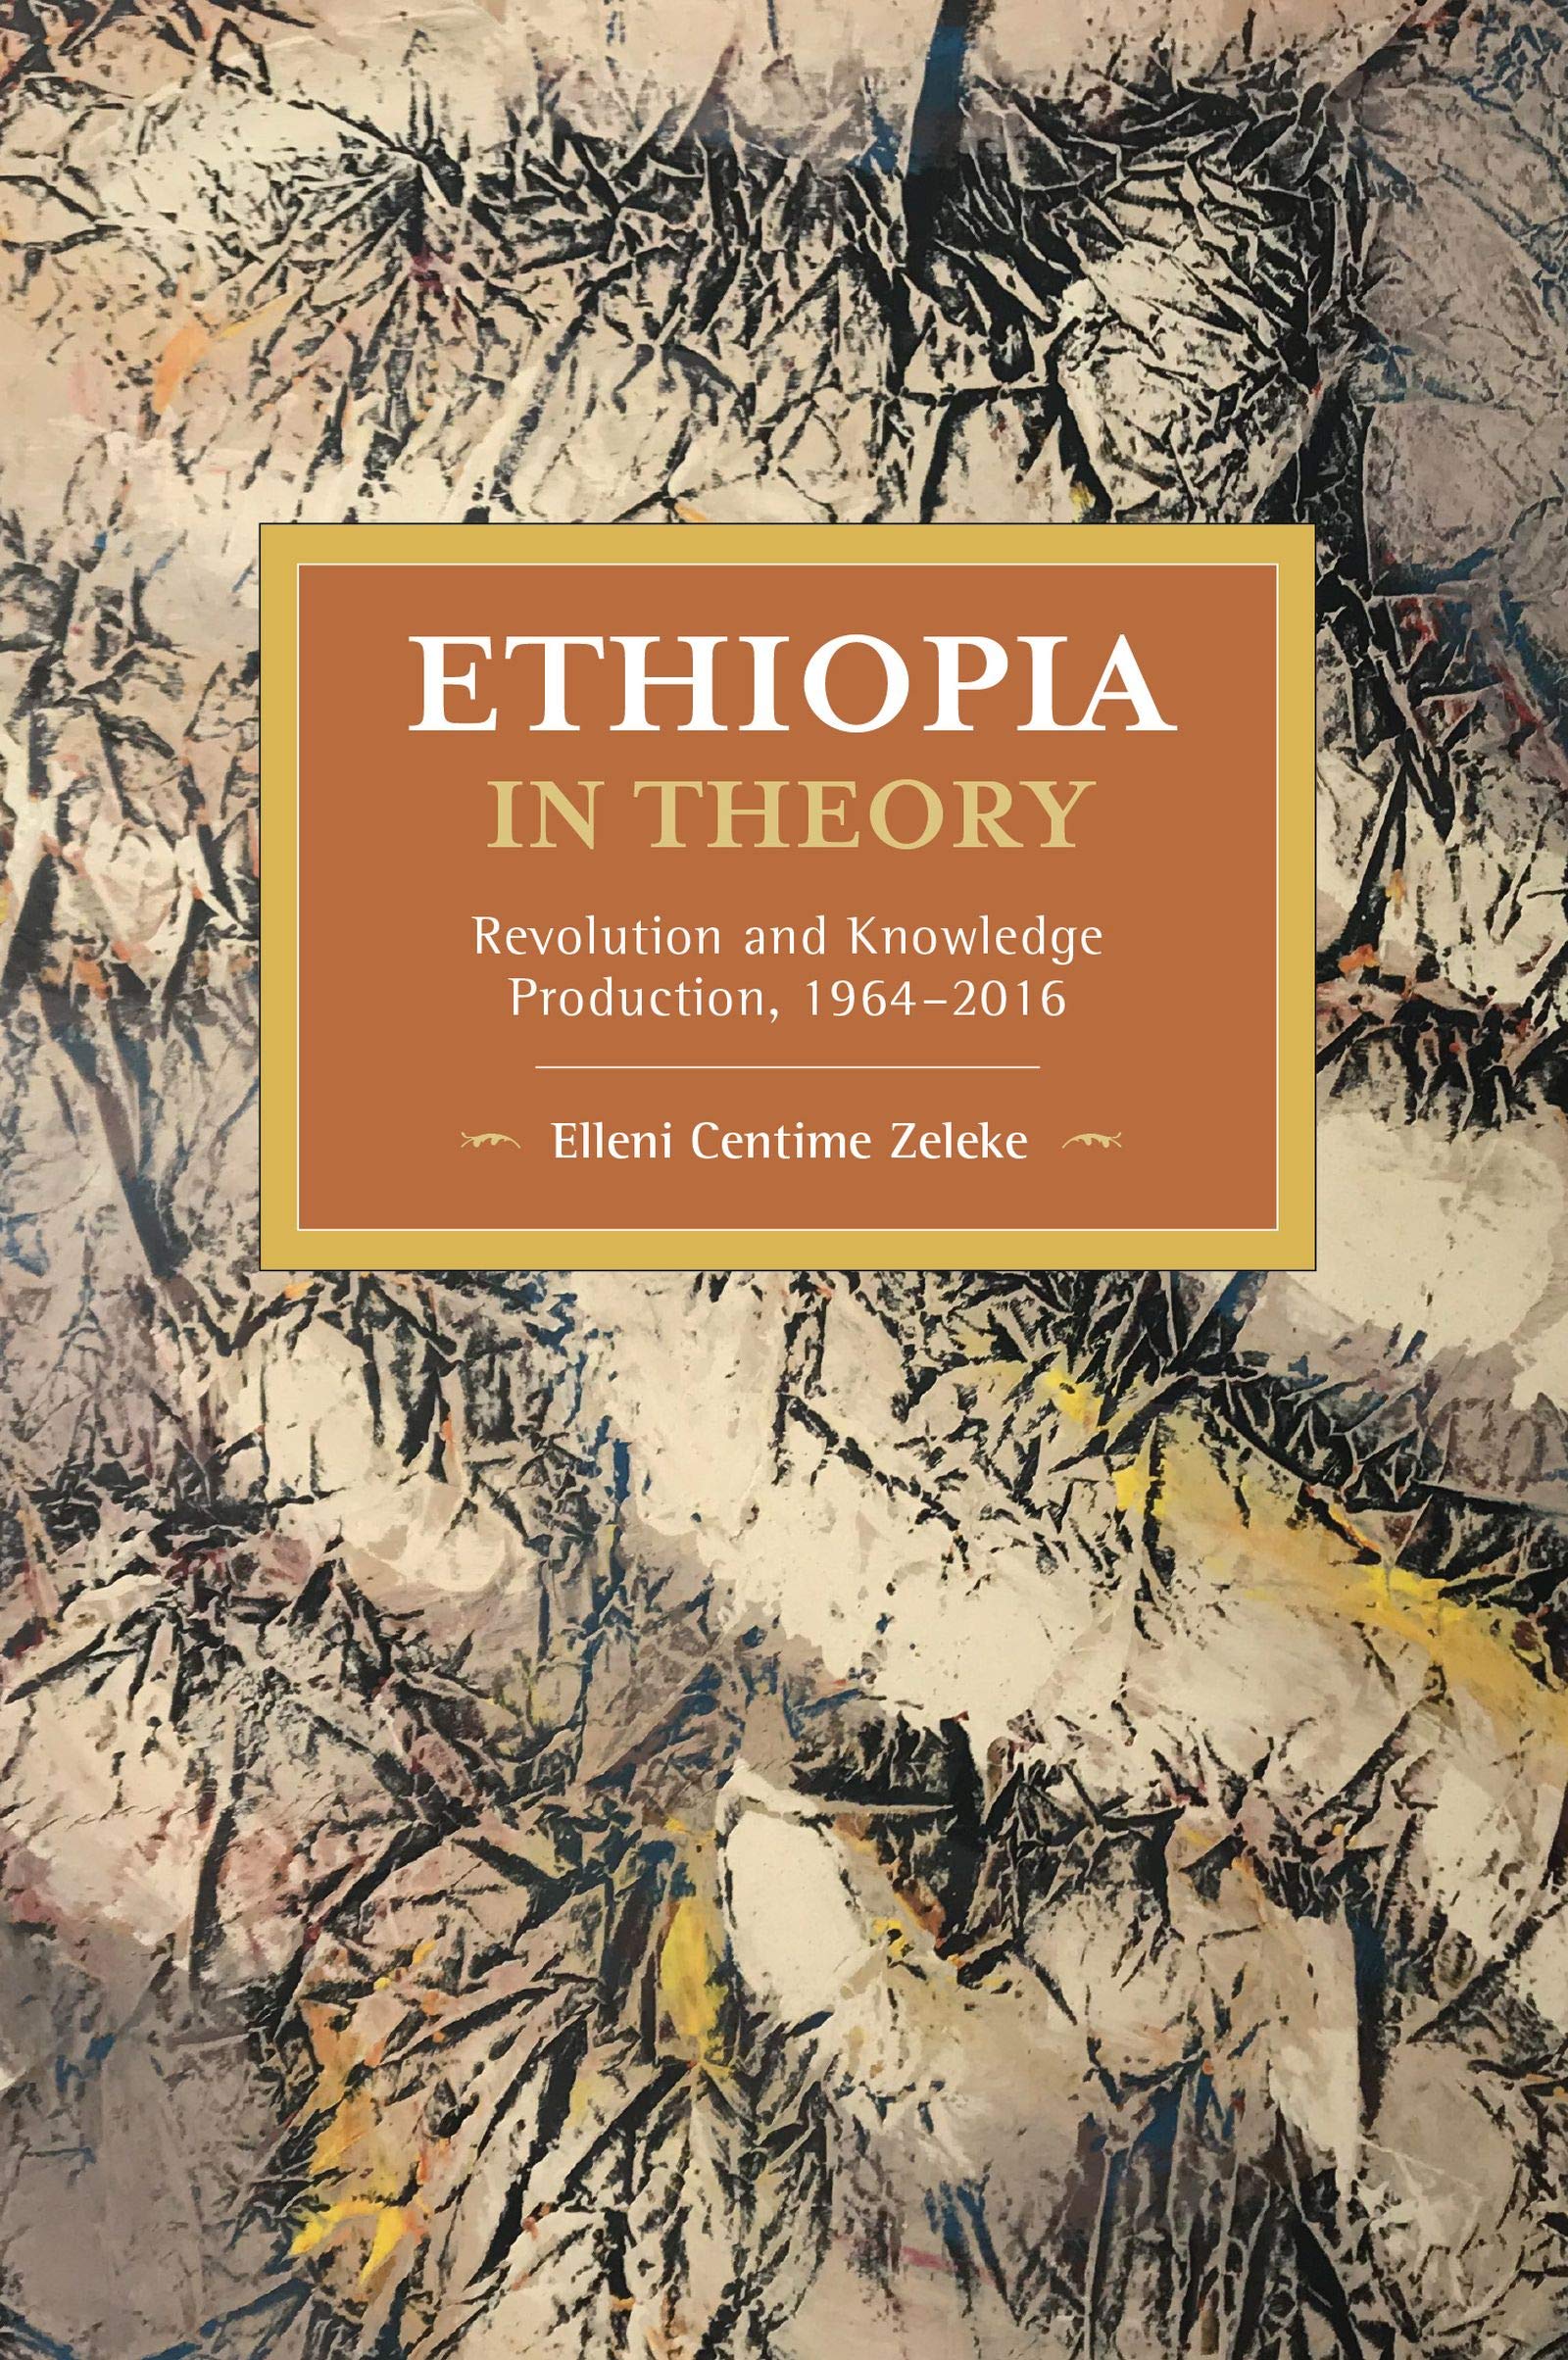 Ethiopia in Theory: Revolution and Knowledge Production, 1964-2016  (Historical Materialism): Zeleke, Elleni Centime: 9781642593419:  Amazon.com: Books